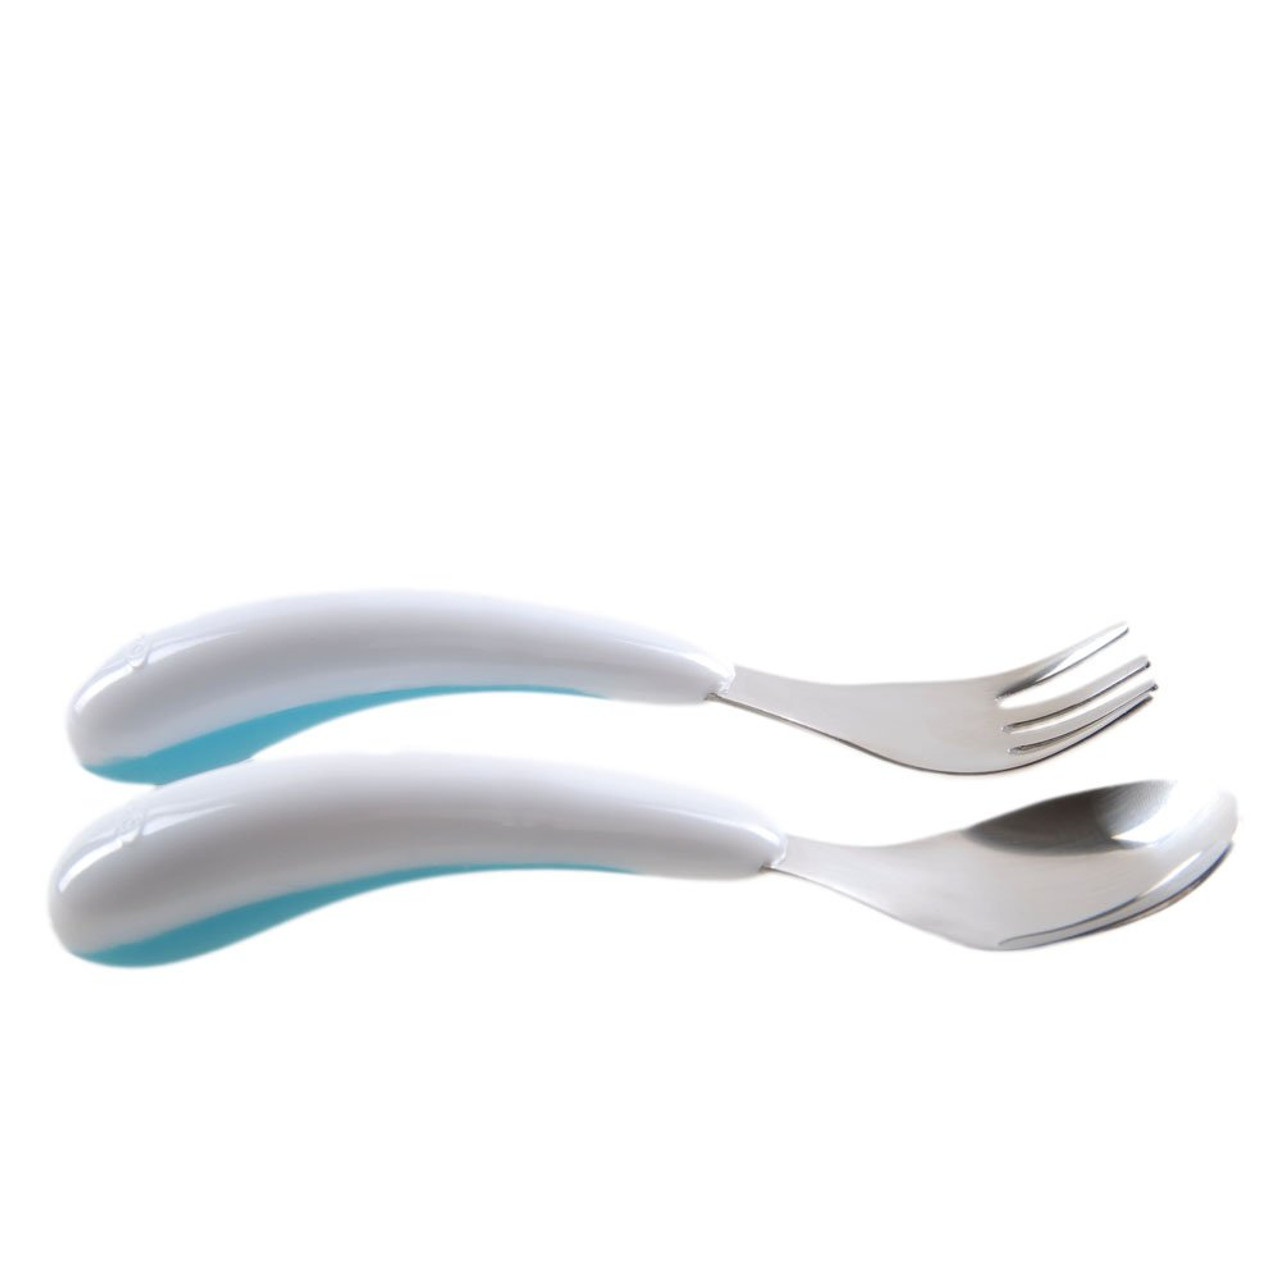 https://cdn11.bigcommerce.com/s-m98be6s3w6/images/stencil/1280x1280/products/7196/11843/OXO-Tot-Fork-Spoon-Set-Aqua-Image04__58048.1697620003.jpg?c=1?imbypass=on